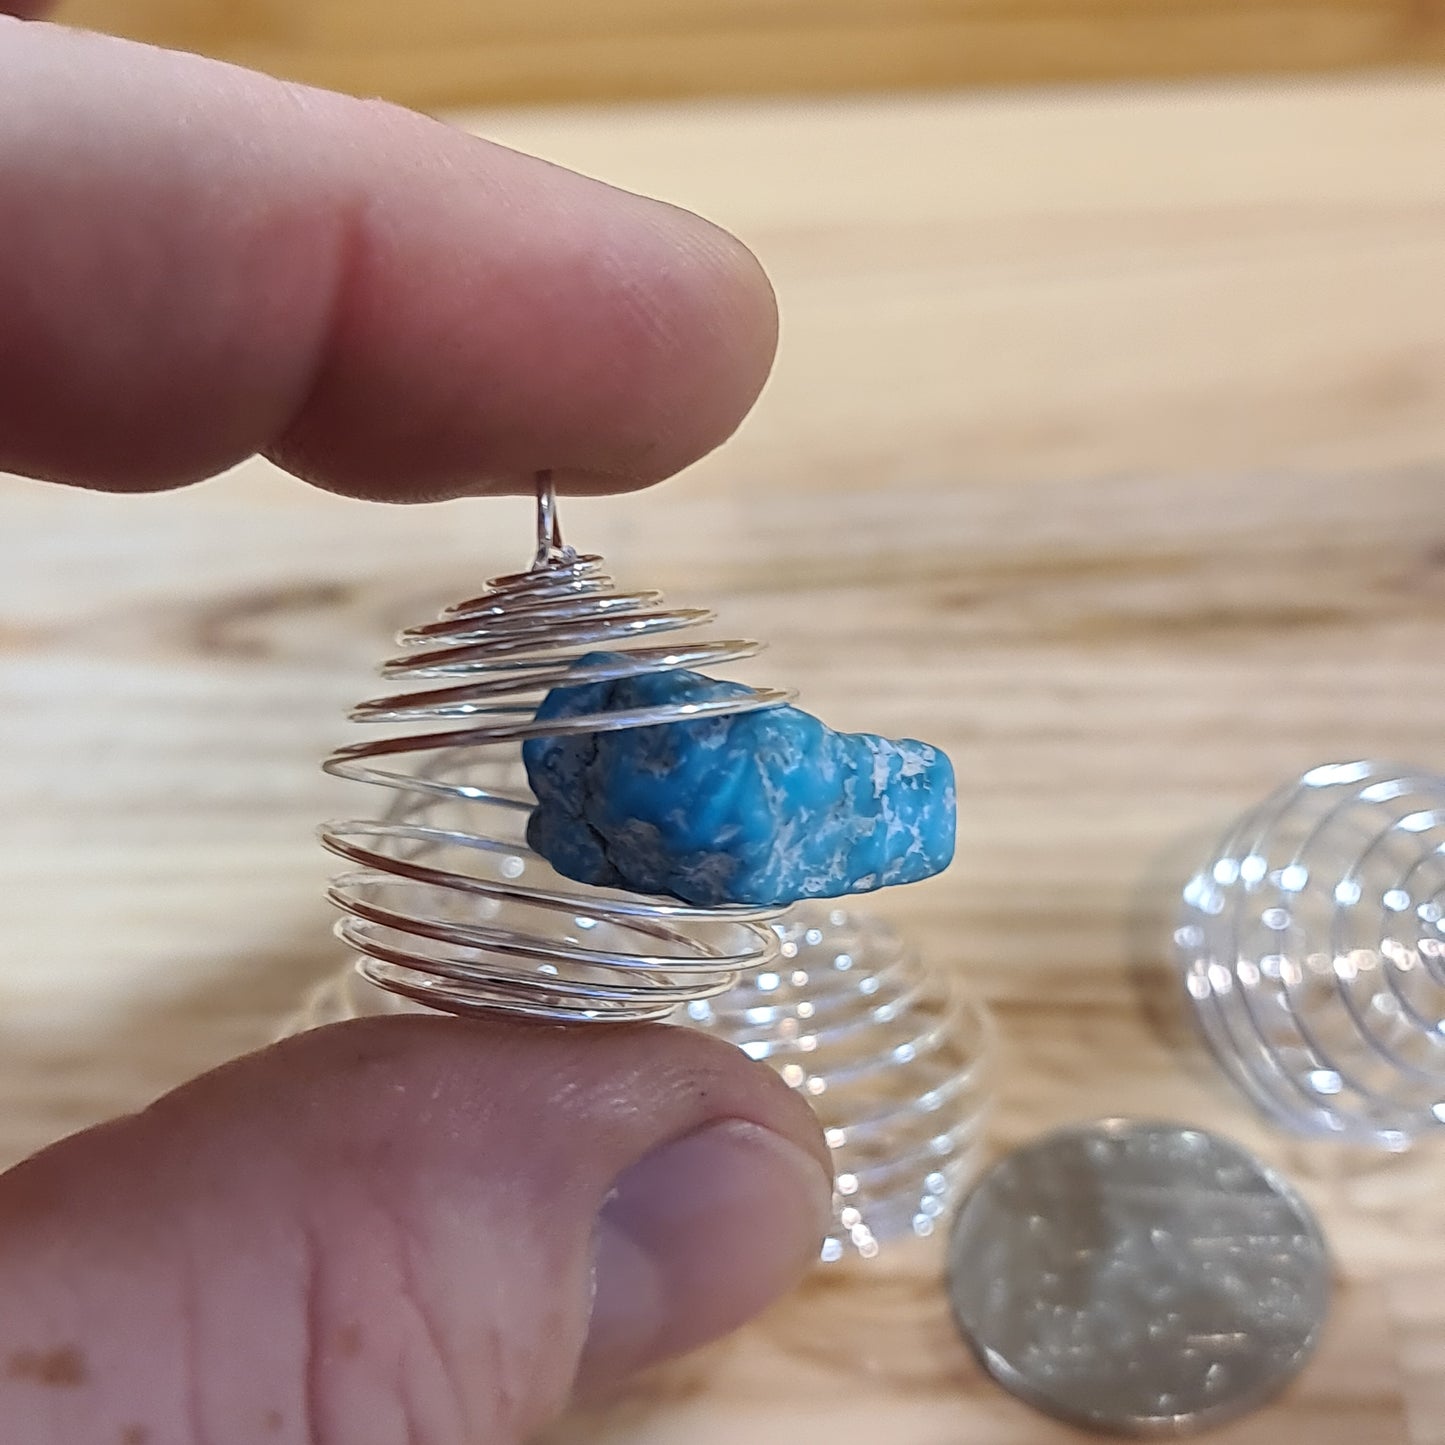 Wire spiral cages